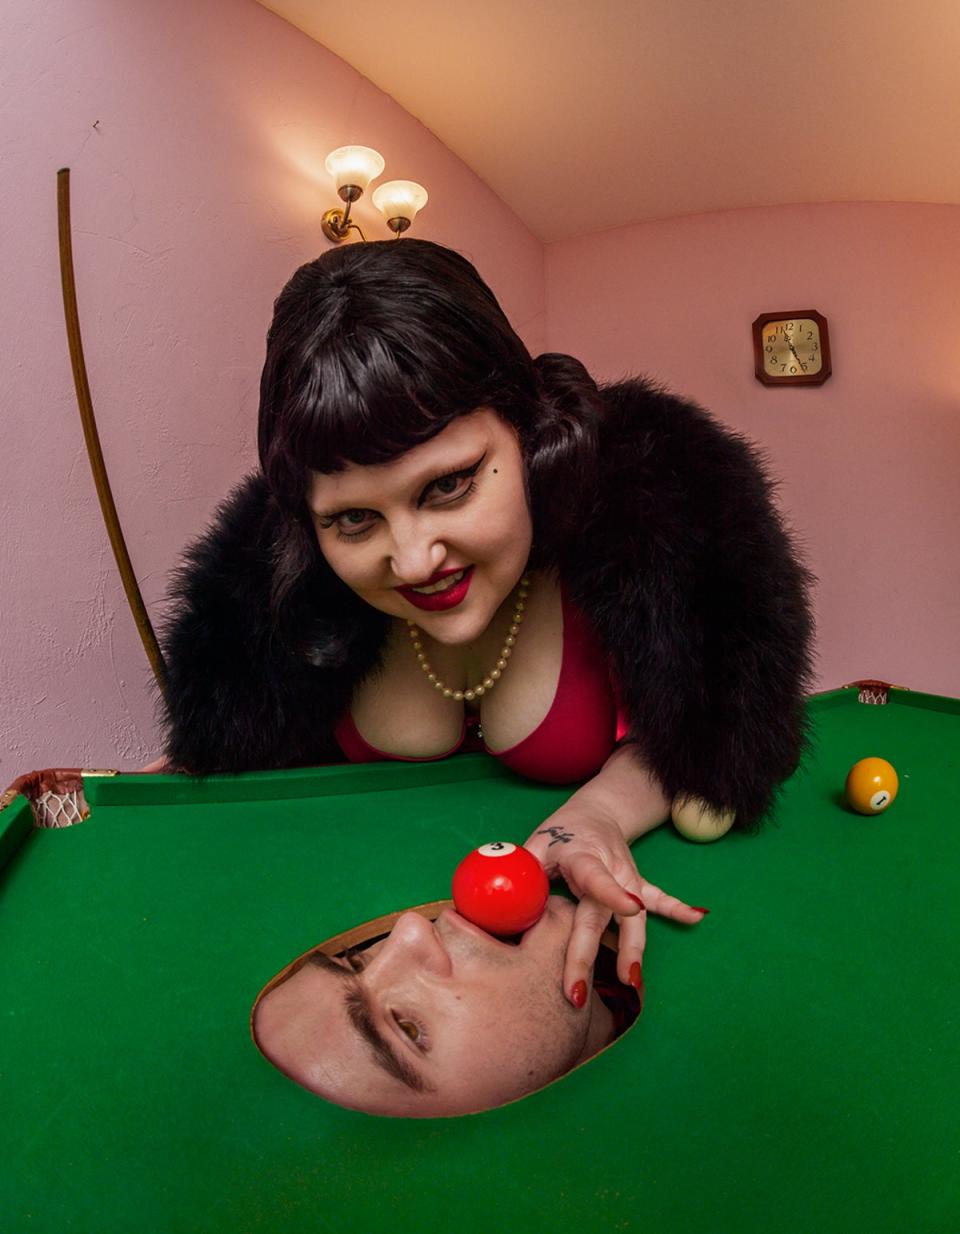 Beth Ditto photographed by Tim Walker for ES Magazine's Fashion Special (ES Magazine)